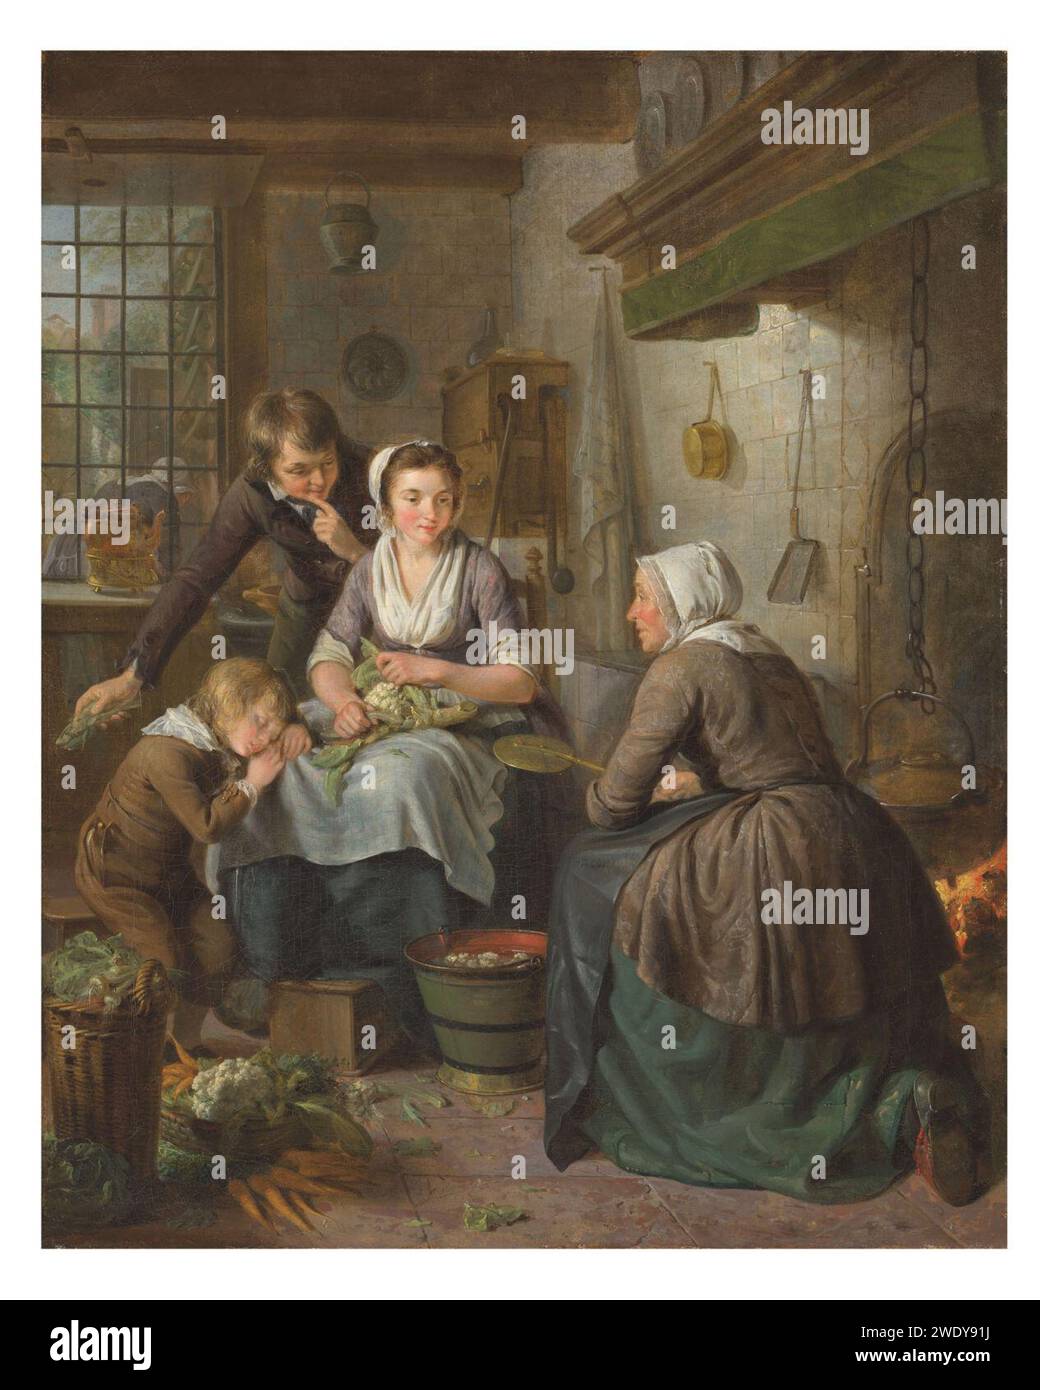 Adriaan de lelie an old woman frying pancakes in a kitchen with a maid073420) (1). Stock Photo